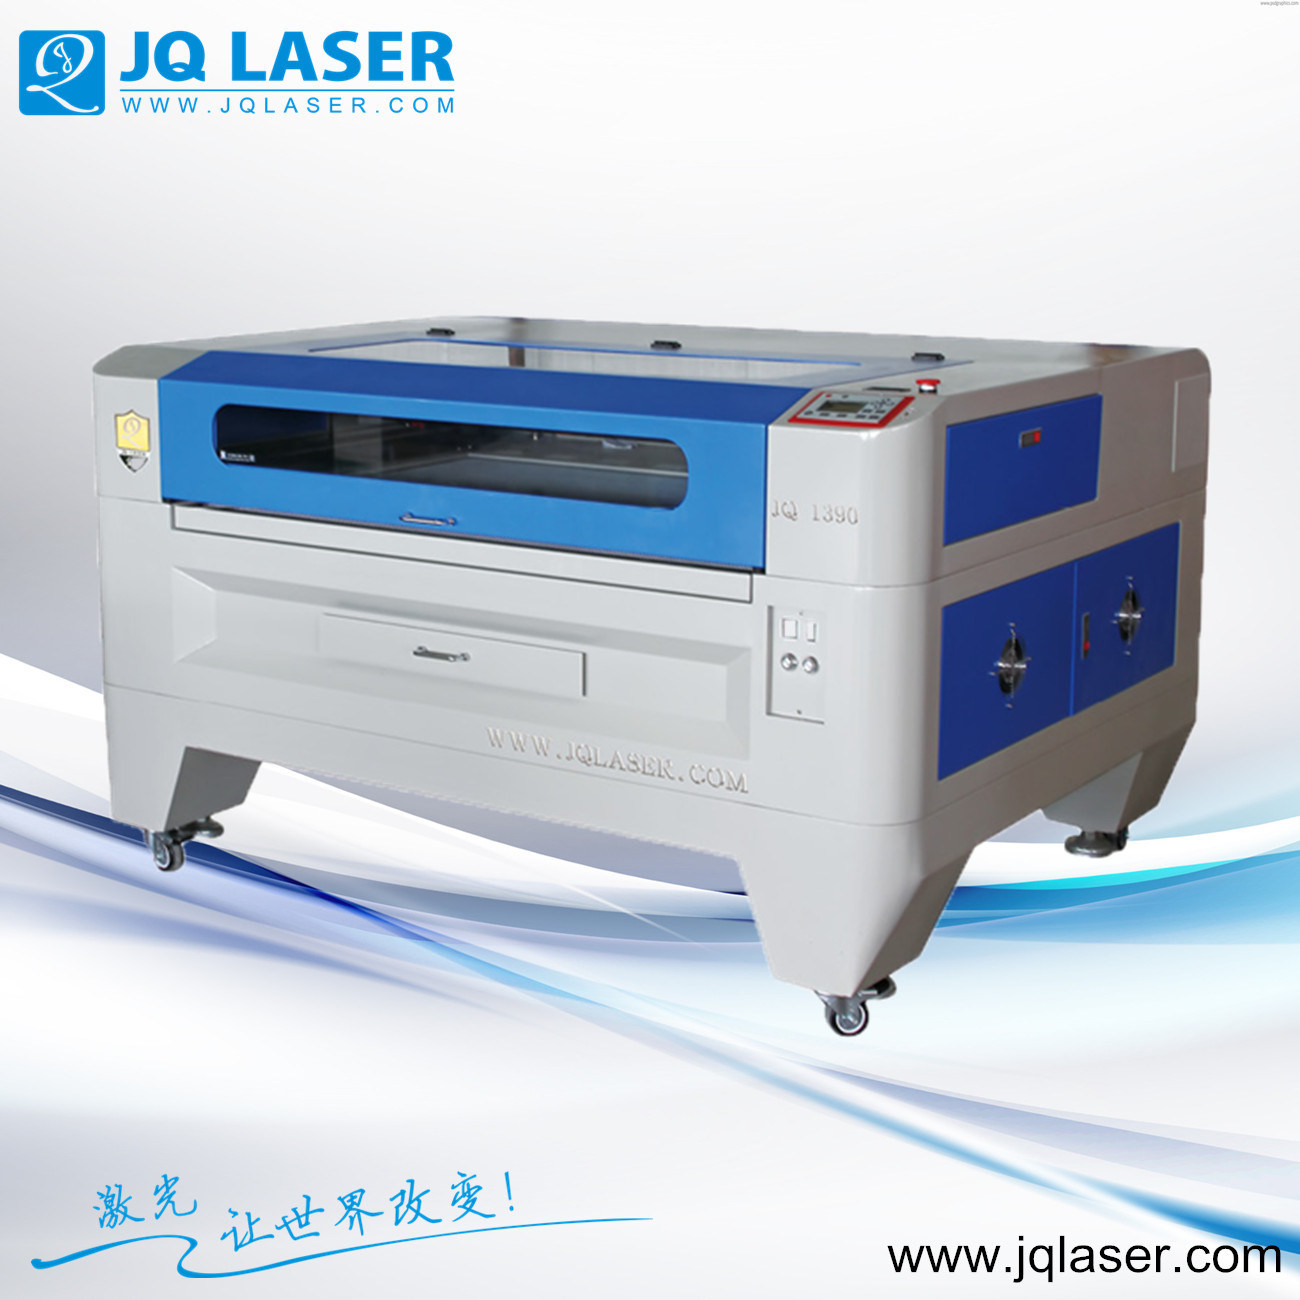 Best Selling Acrylic Laser Cutter Machine with Cheap Price